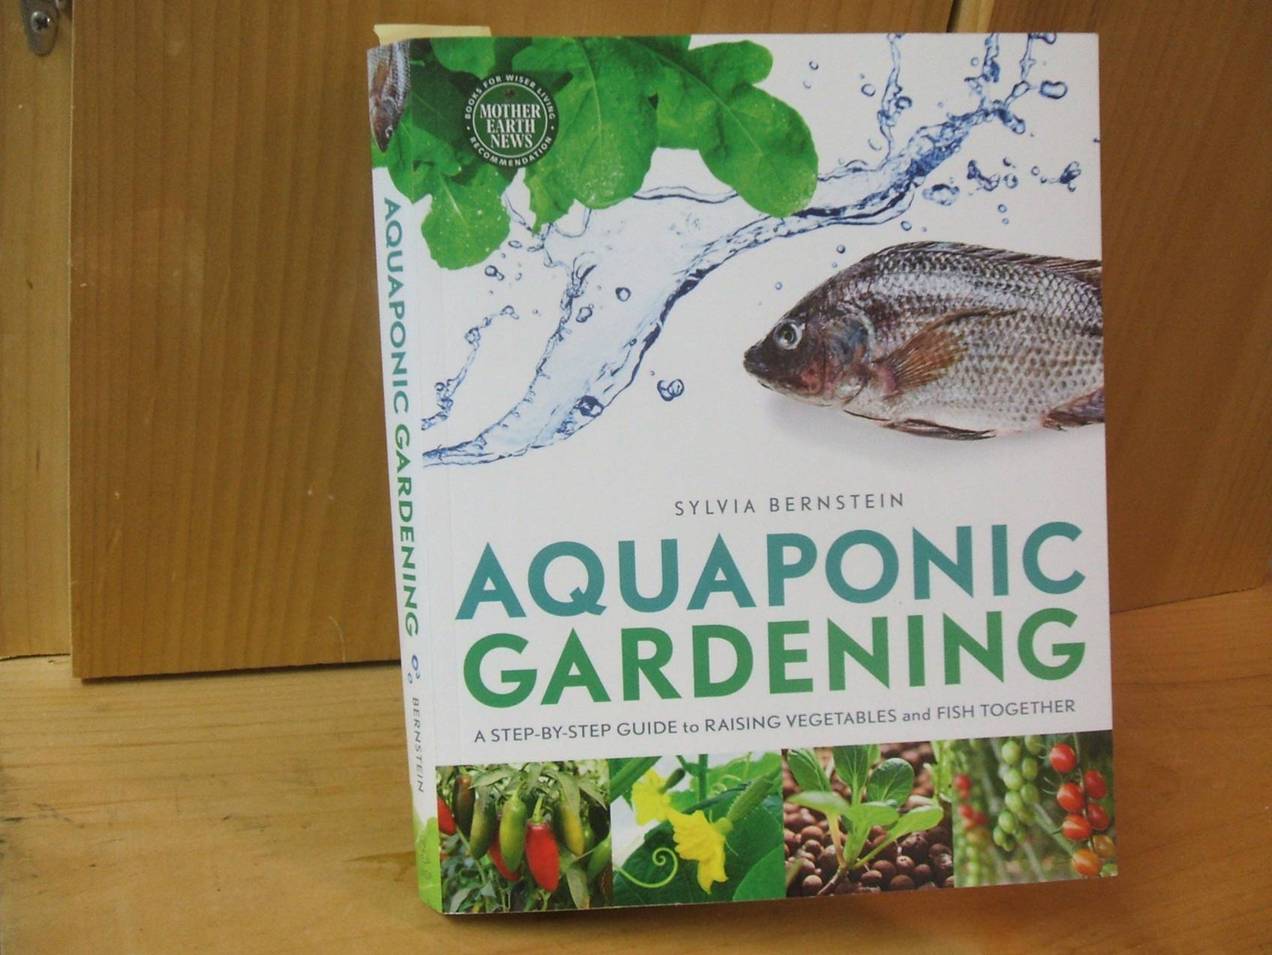 ... Laboratory: Book Review: Aquaponic Gardening by Sylvia Bernstein